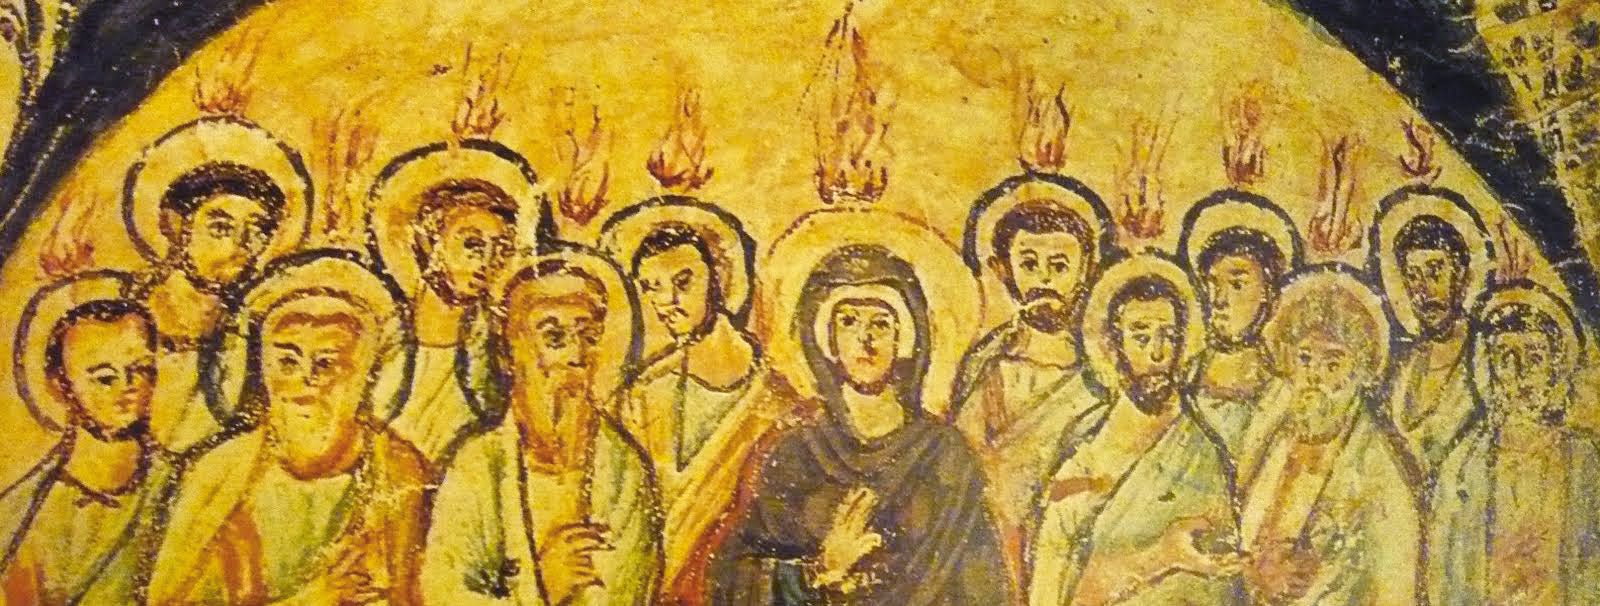 Confusion or Communion - Seeking the Peace of Pentecost in Our Time